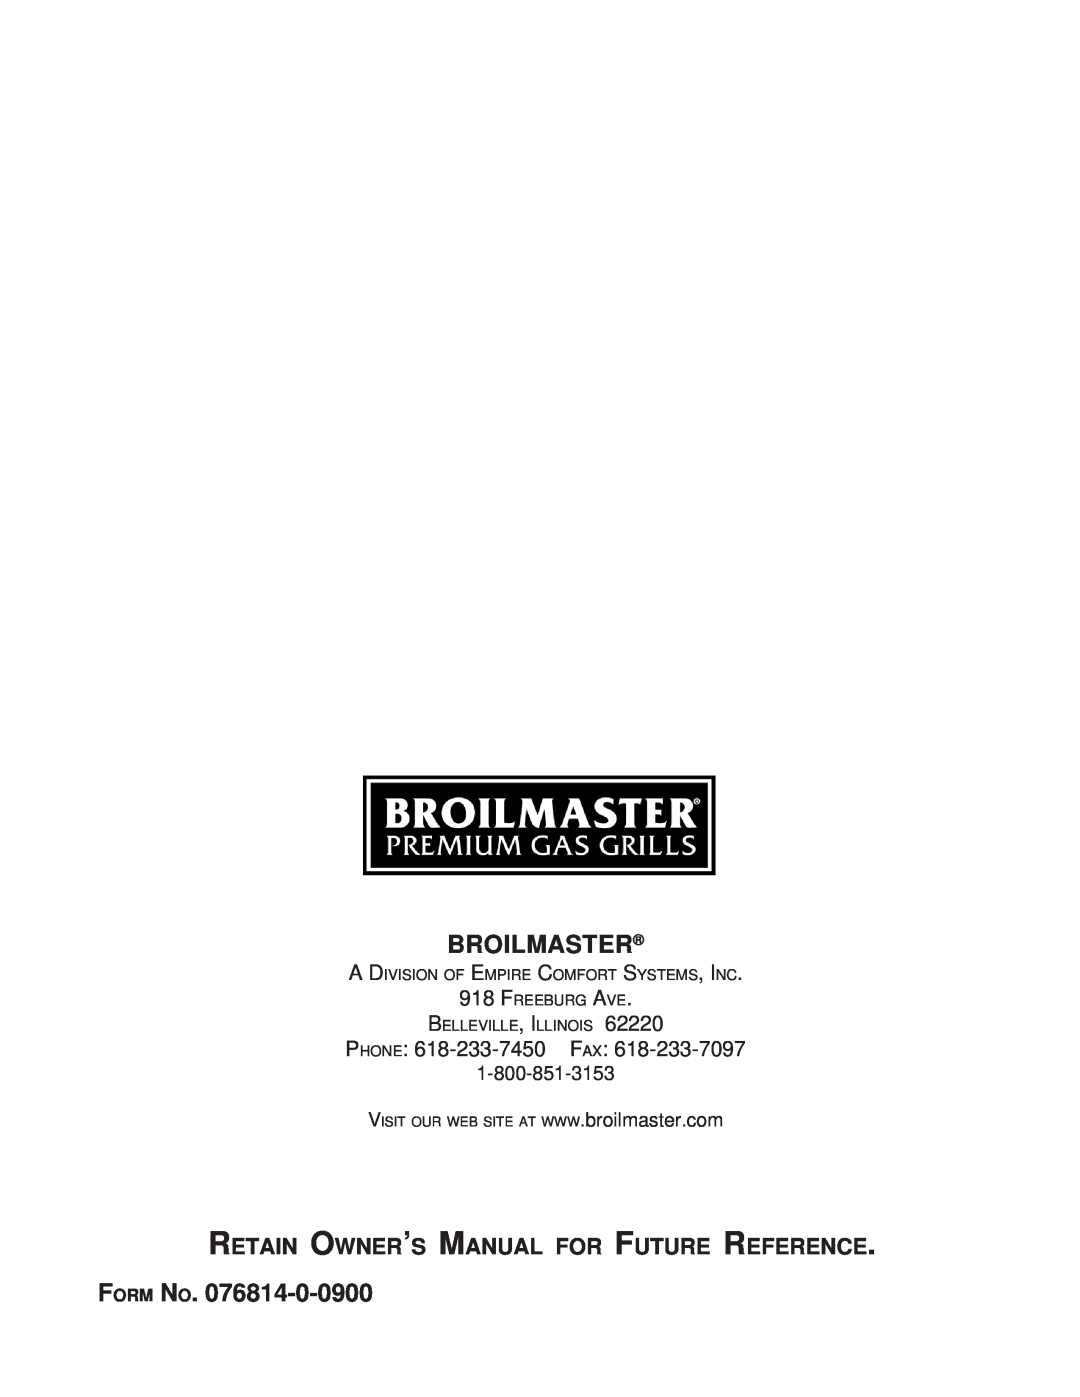 Broilmaster U48, DC, U26SS, PB, PC, AND P48 owner manual Retain Owner’S Manual For Future Reference, Broilmaster, Form No 